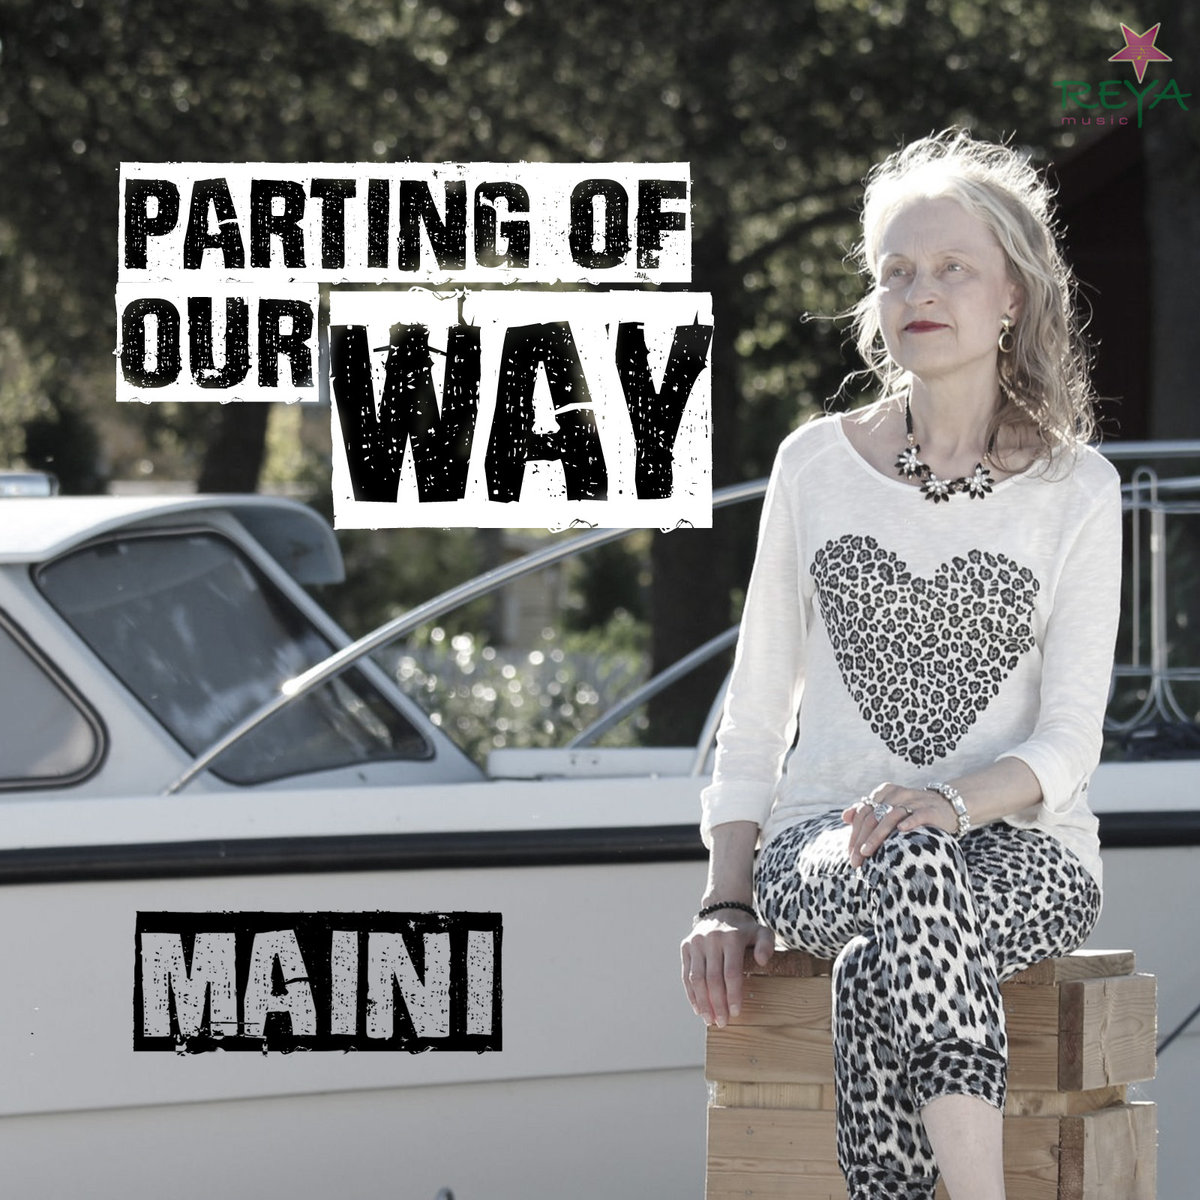  Maini – “Parting Of Our Way”